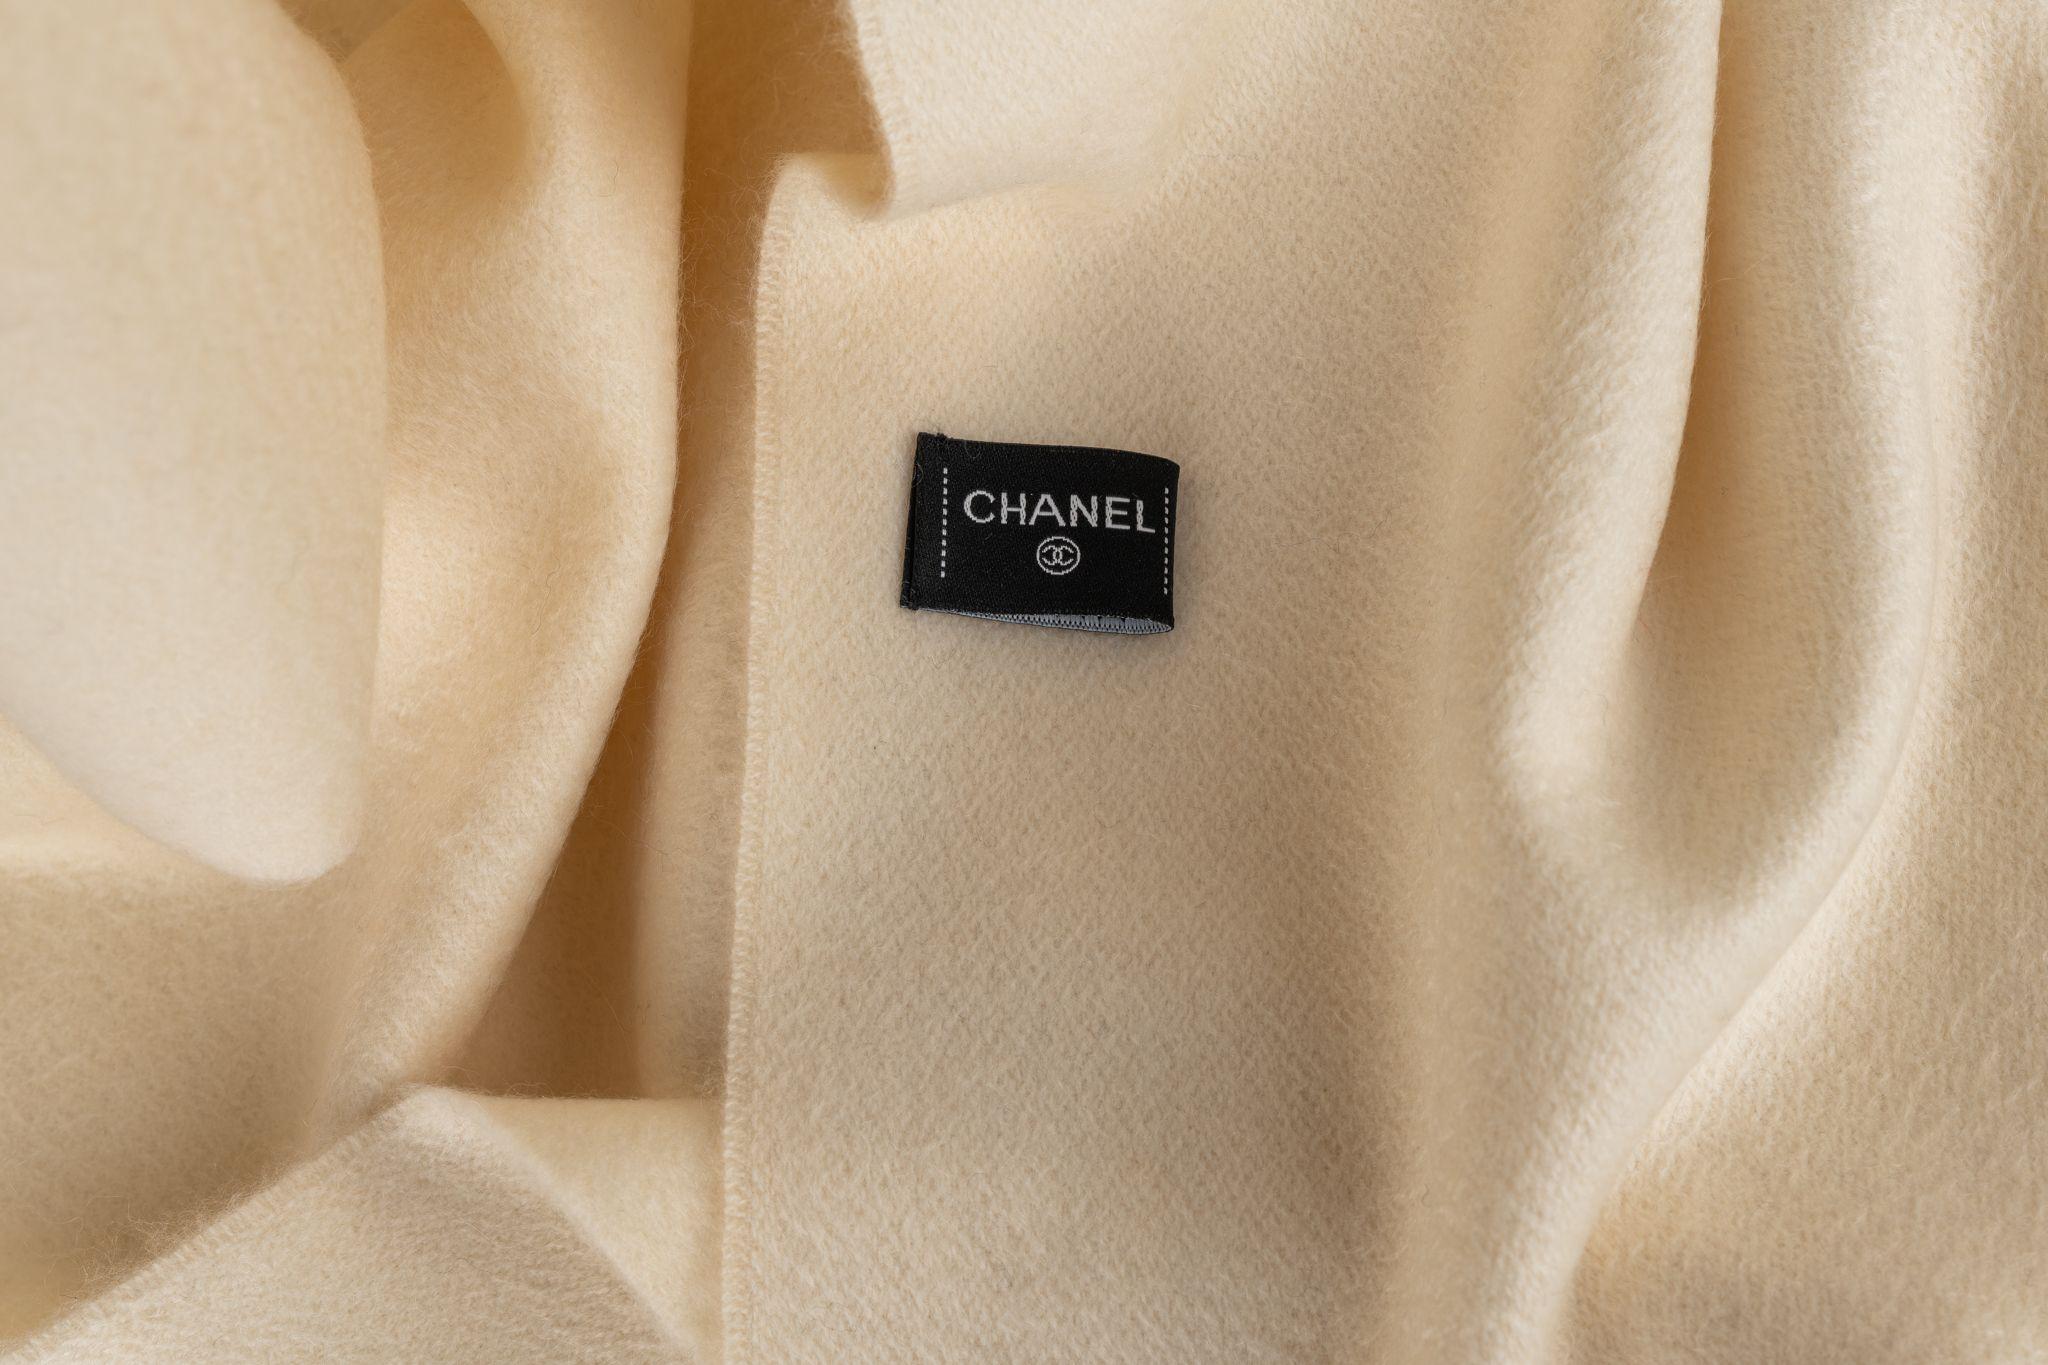 Chanel Cashmere Shawl in beige with fringes. The scarf also features a print of the Chanel rose. Item is in new condition.